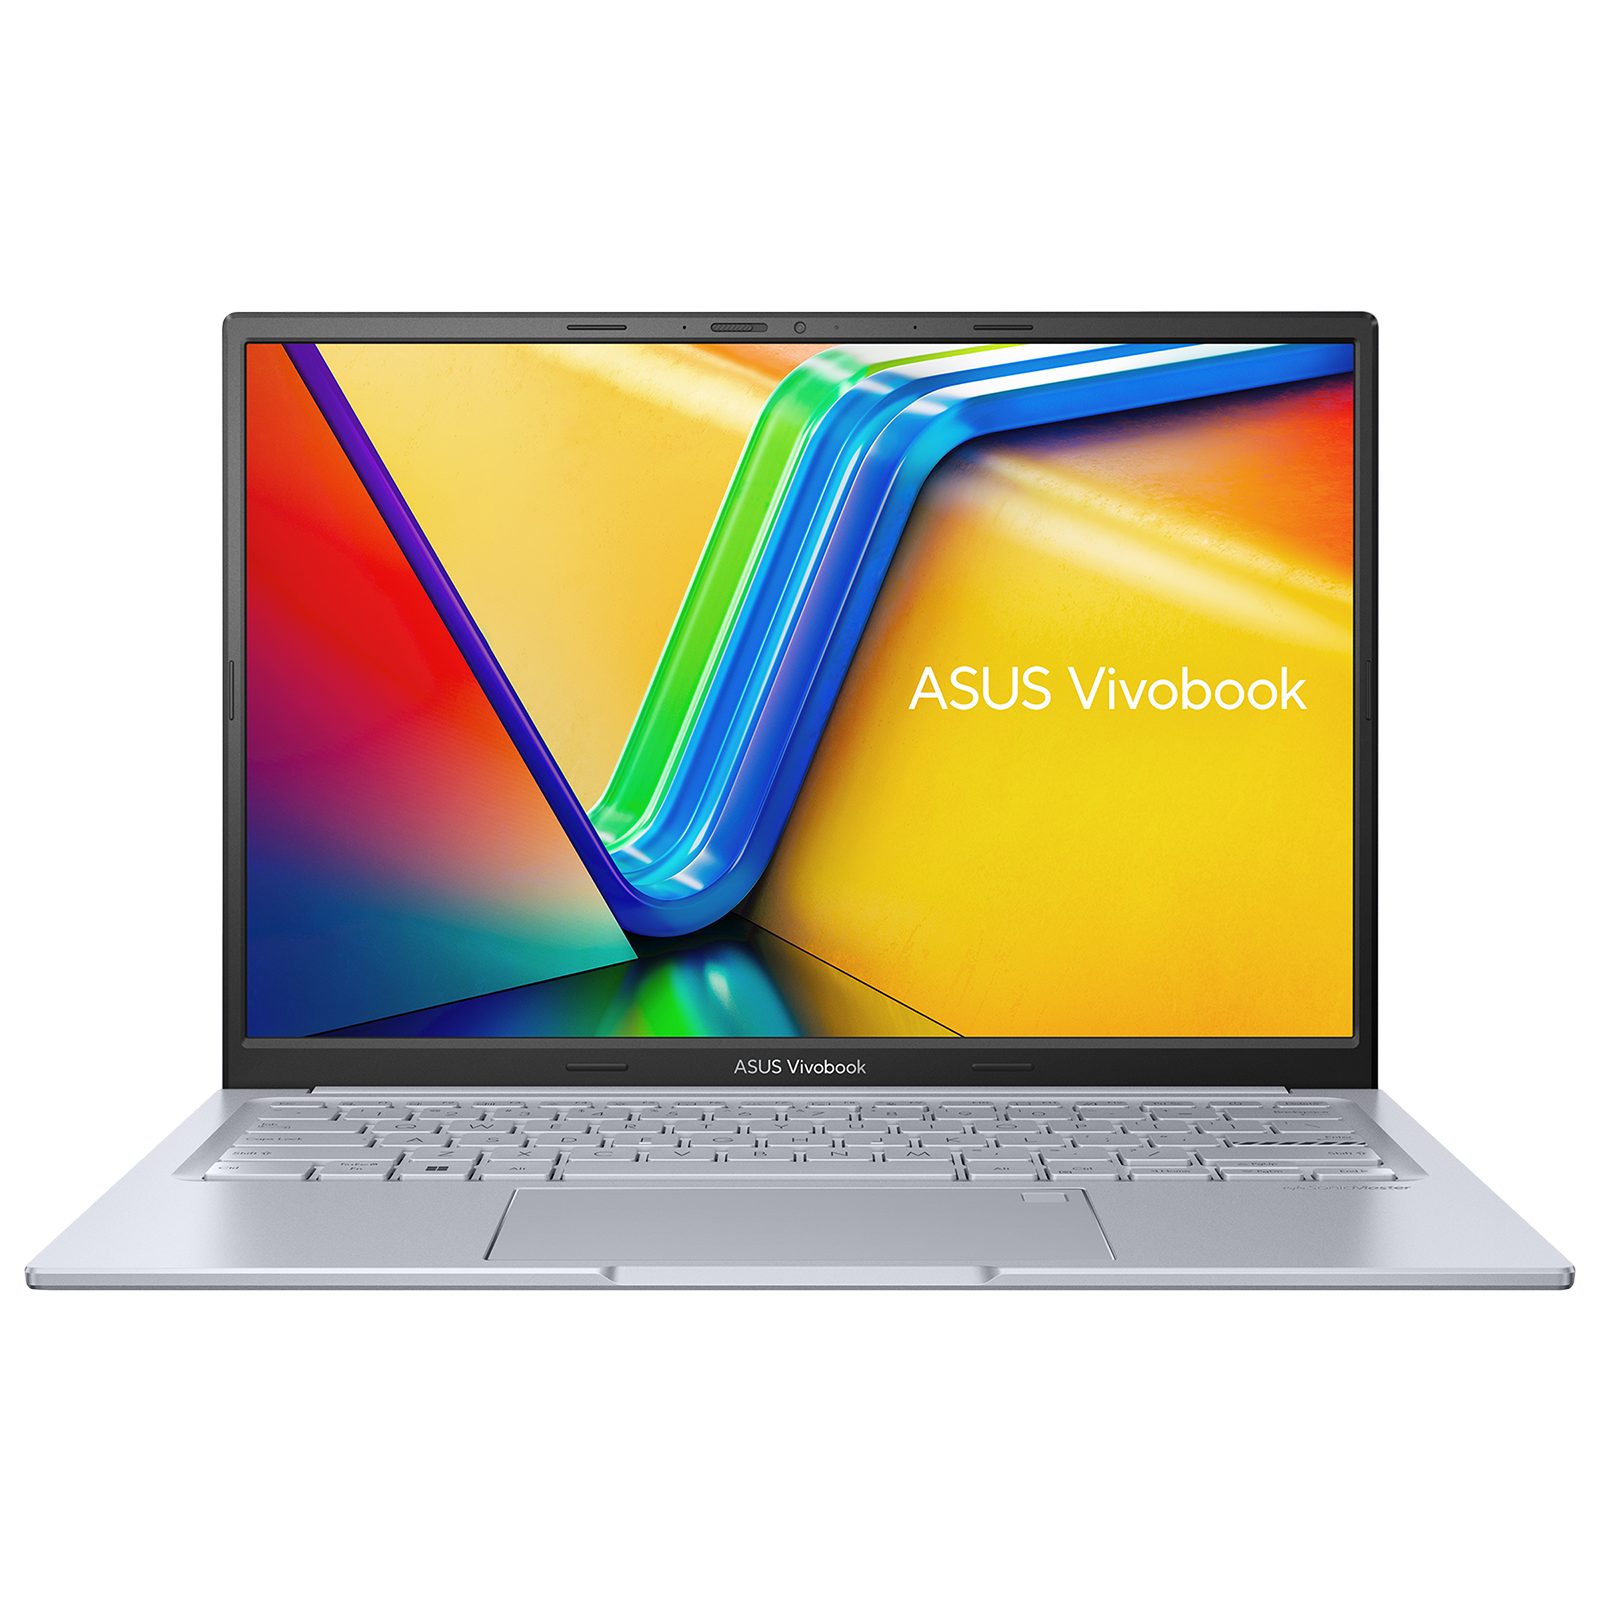 ASUS Vivobook 14X Intel Core i7 12th Gen (14 inch, 16GB, 1TB, Windows 11 Home, MS Office 2021, NVIDIA GeForce RTX 2050, WUXGA IPS Display, Cool Silver, K3405ZF-LY752WS)